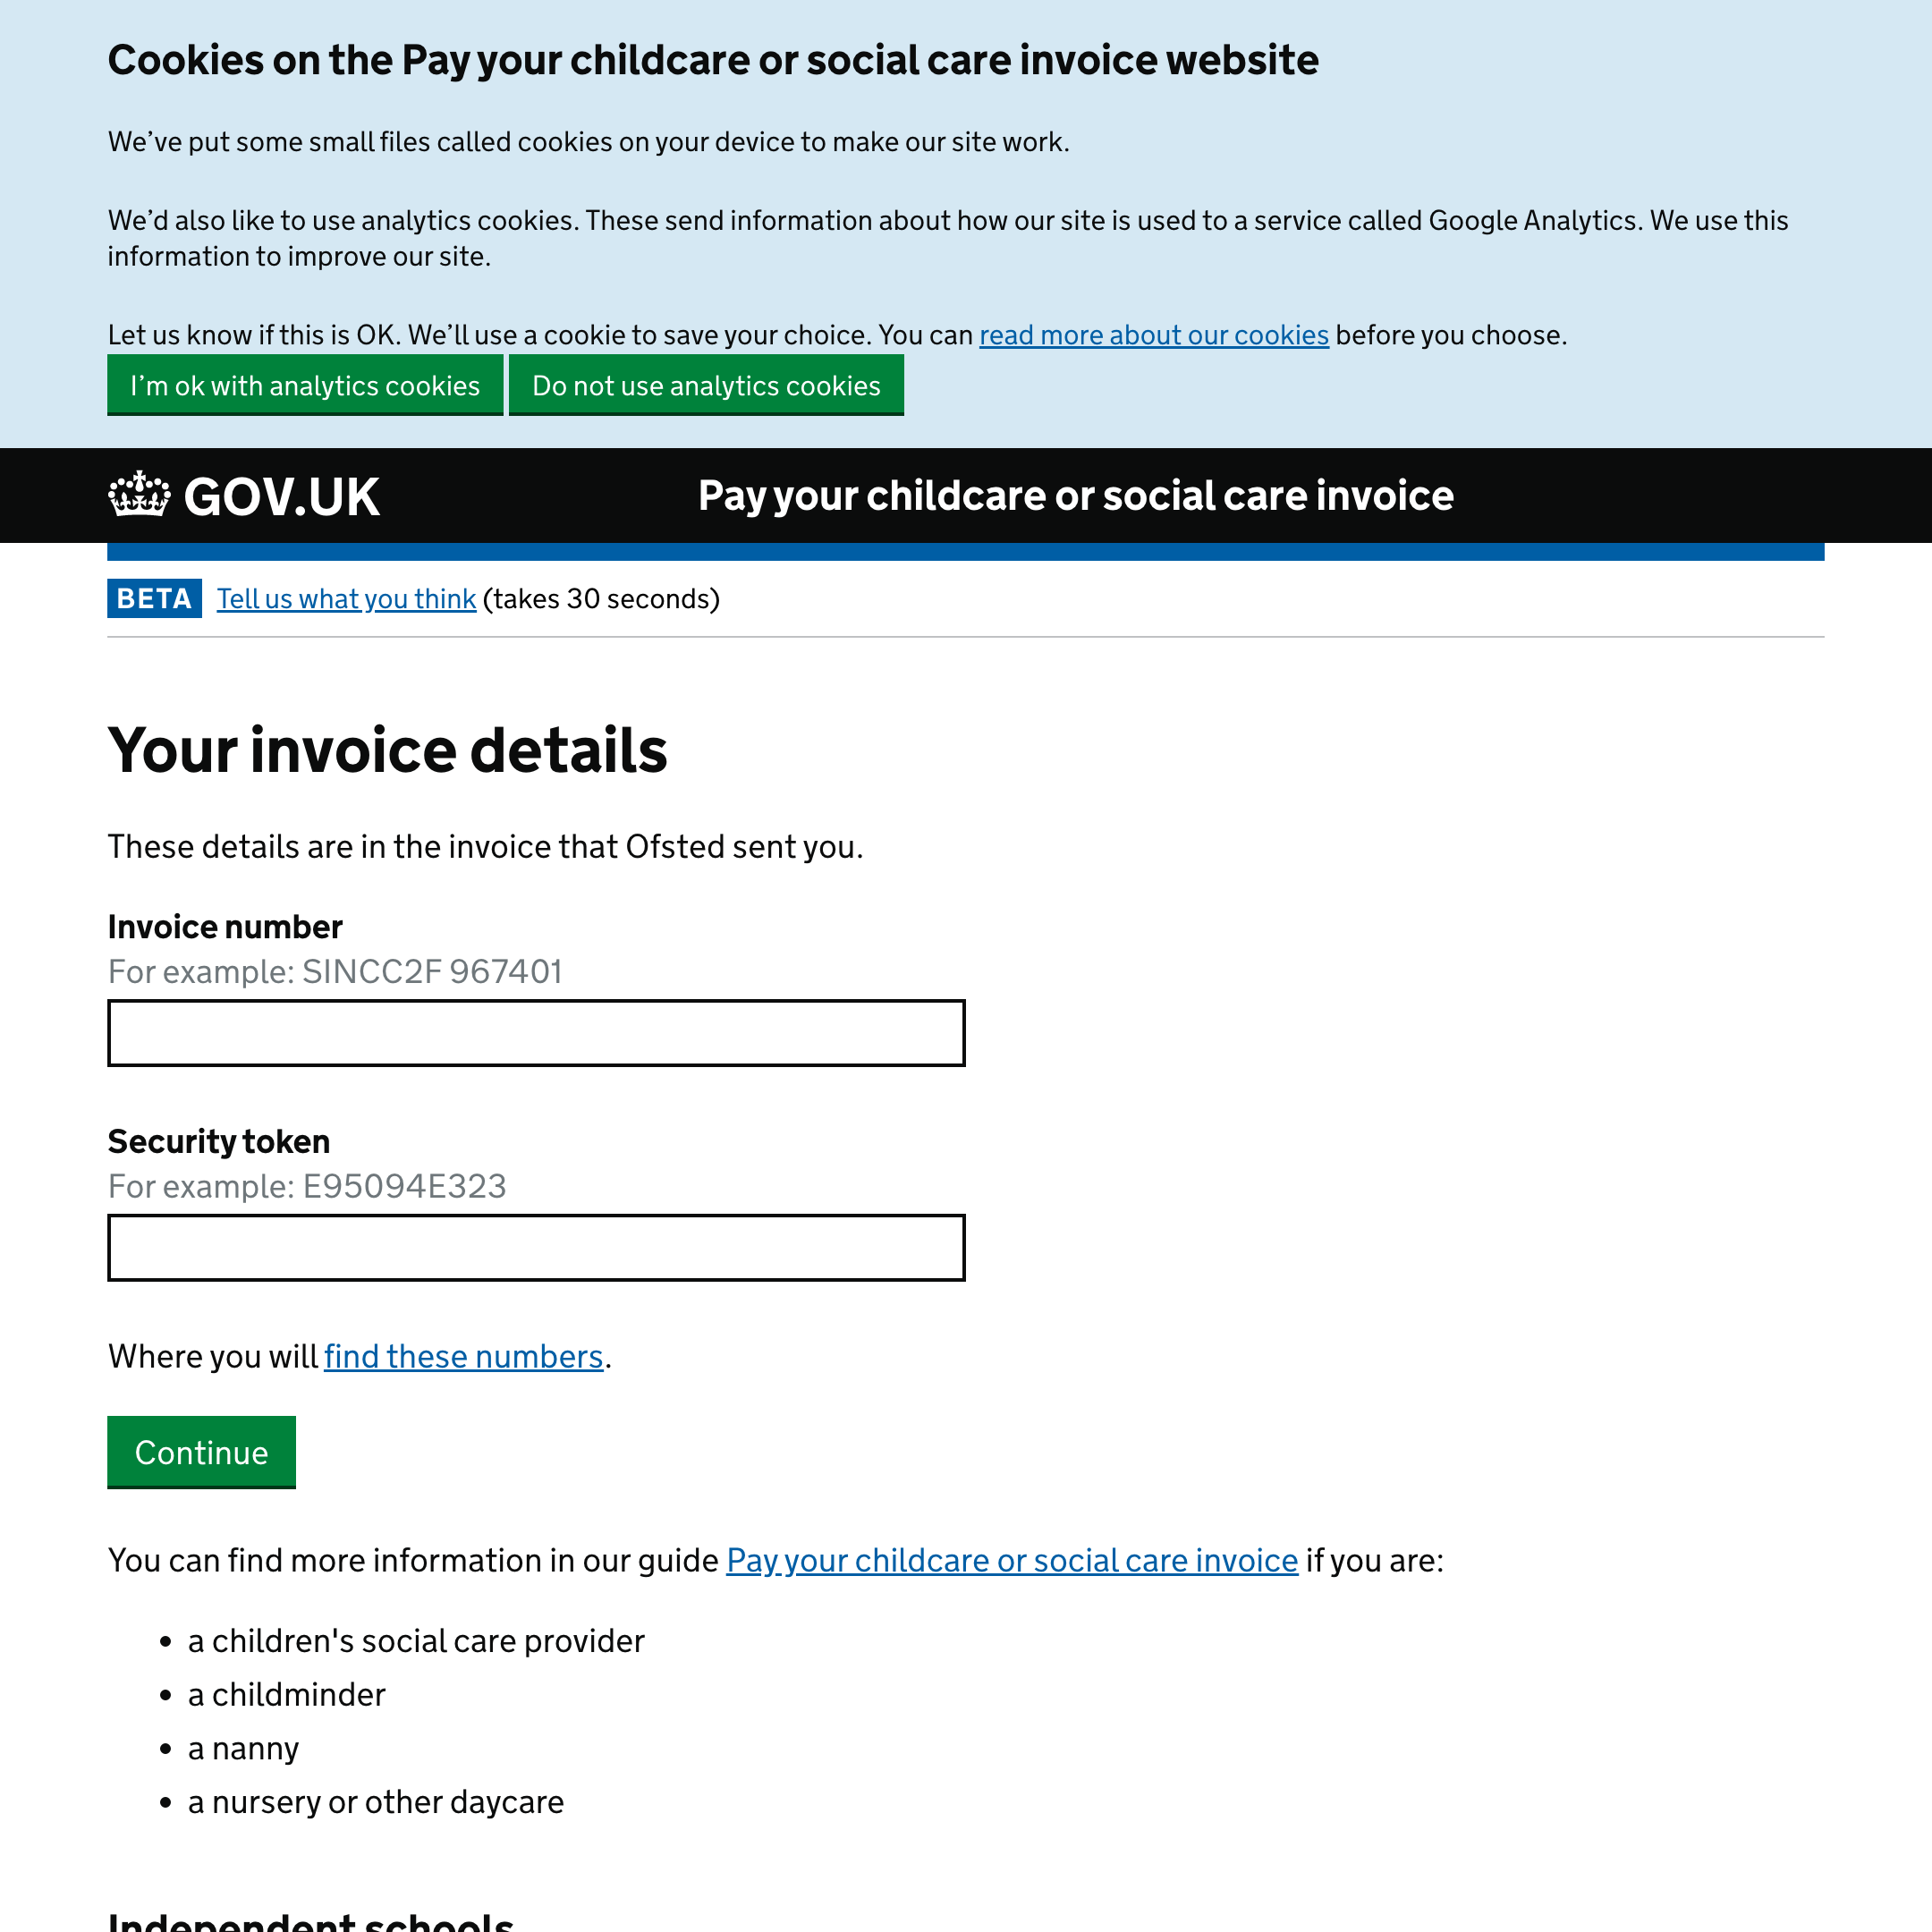 Pay your childcare or social care invoice